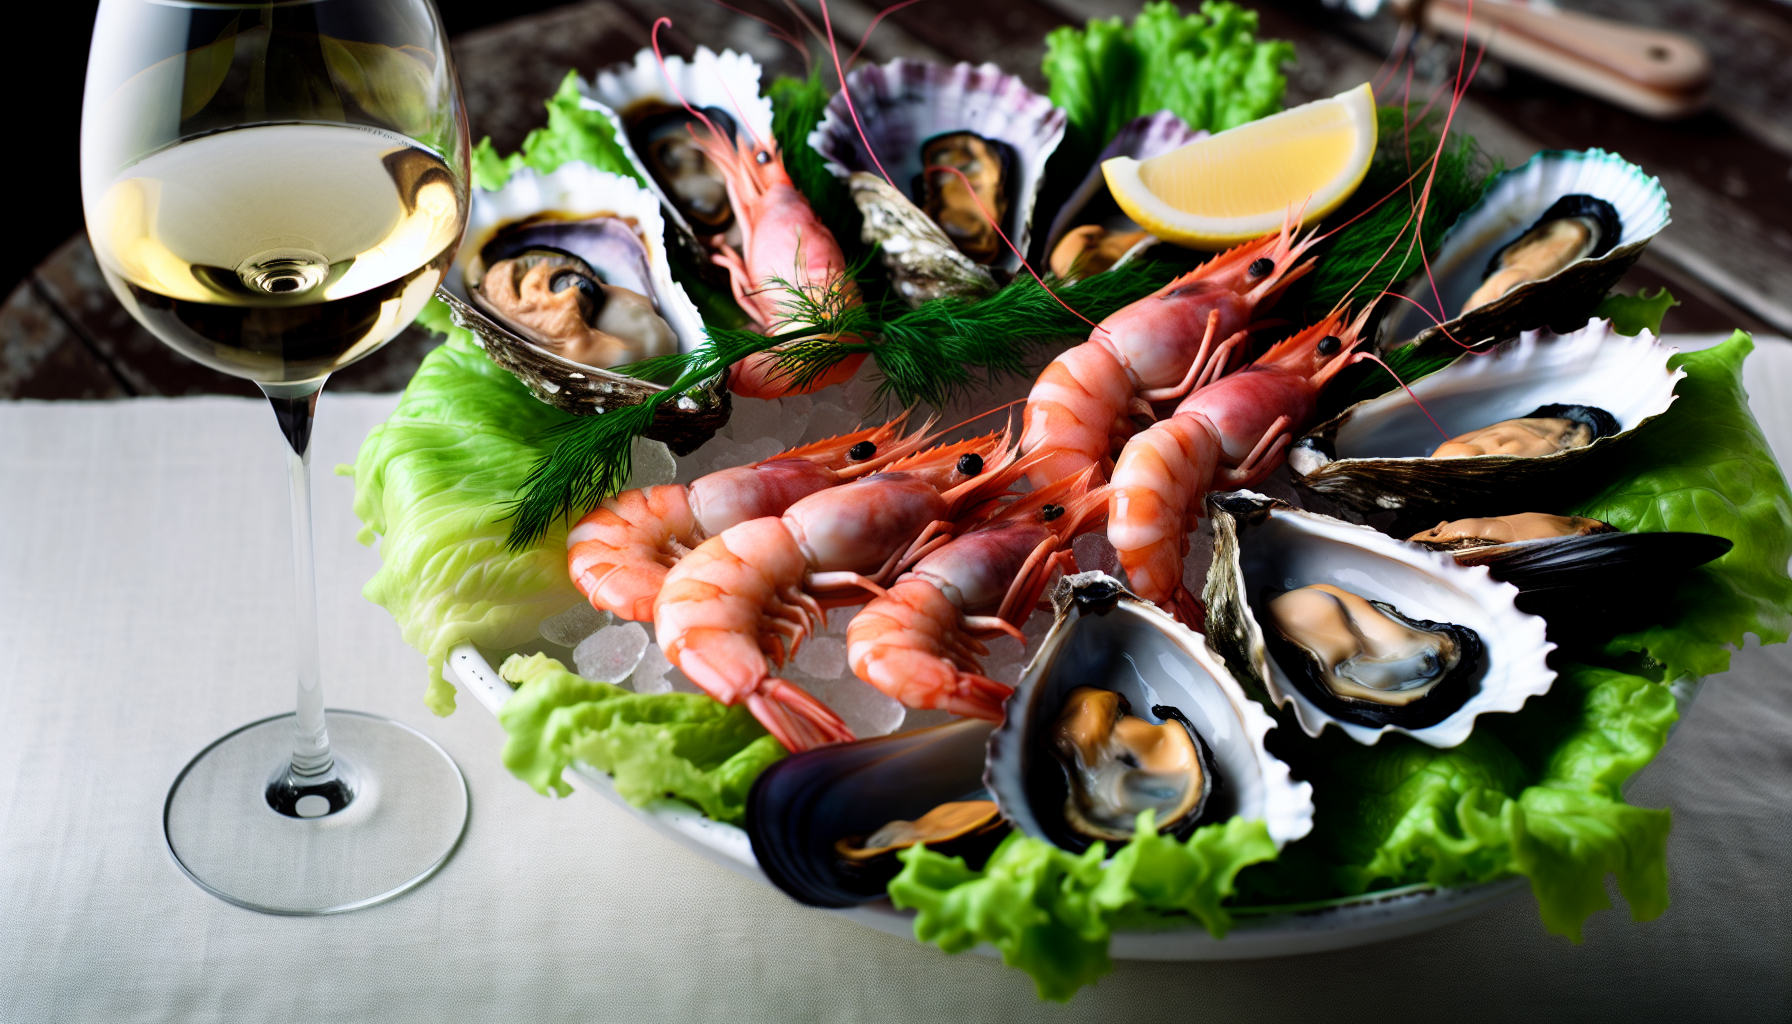 Freshly prepared seafood platter with a glass of white wine